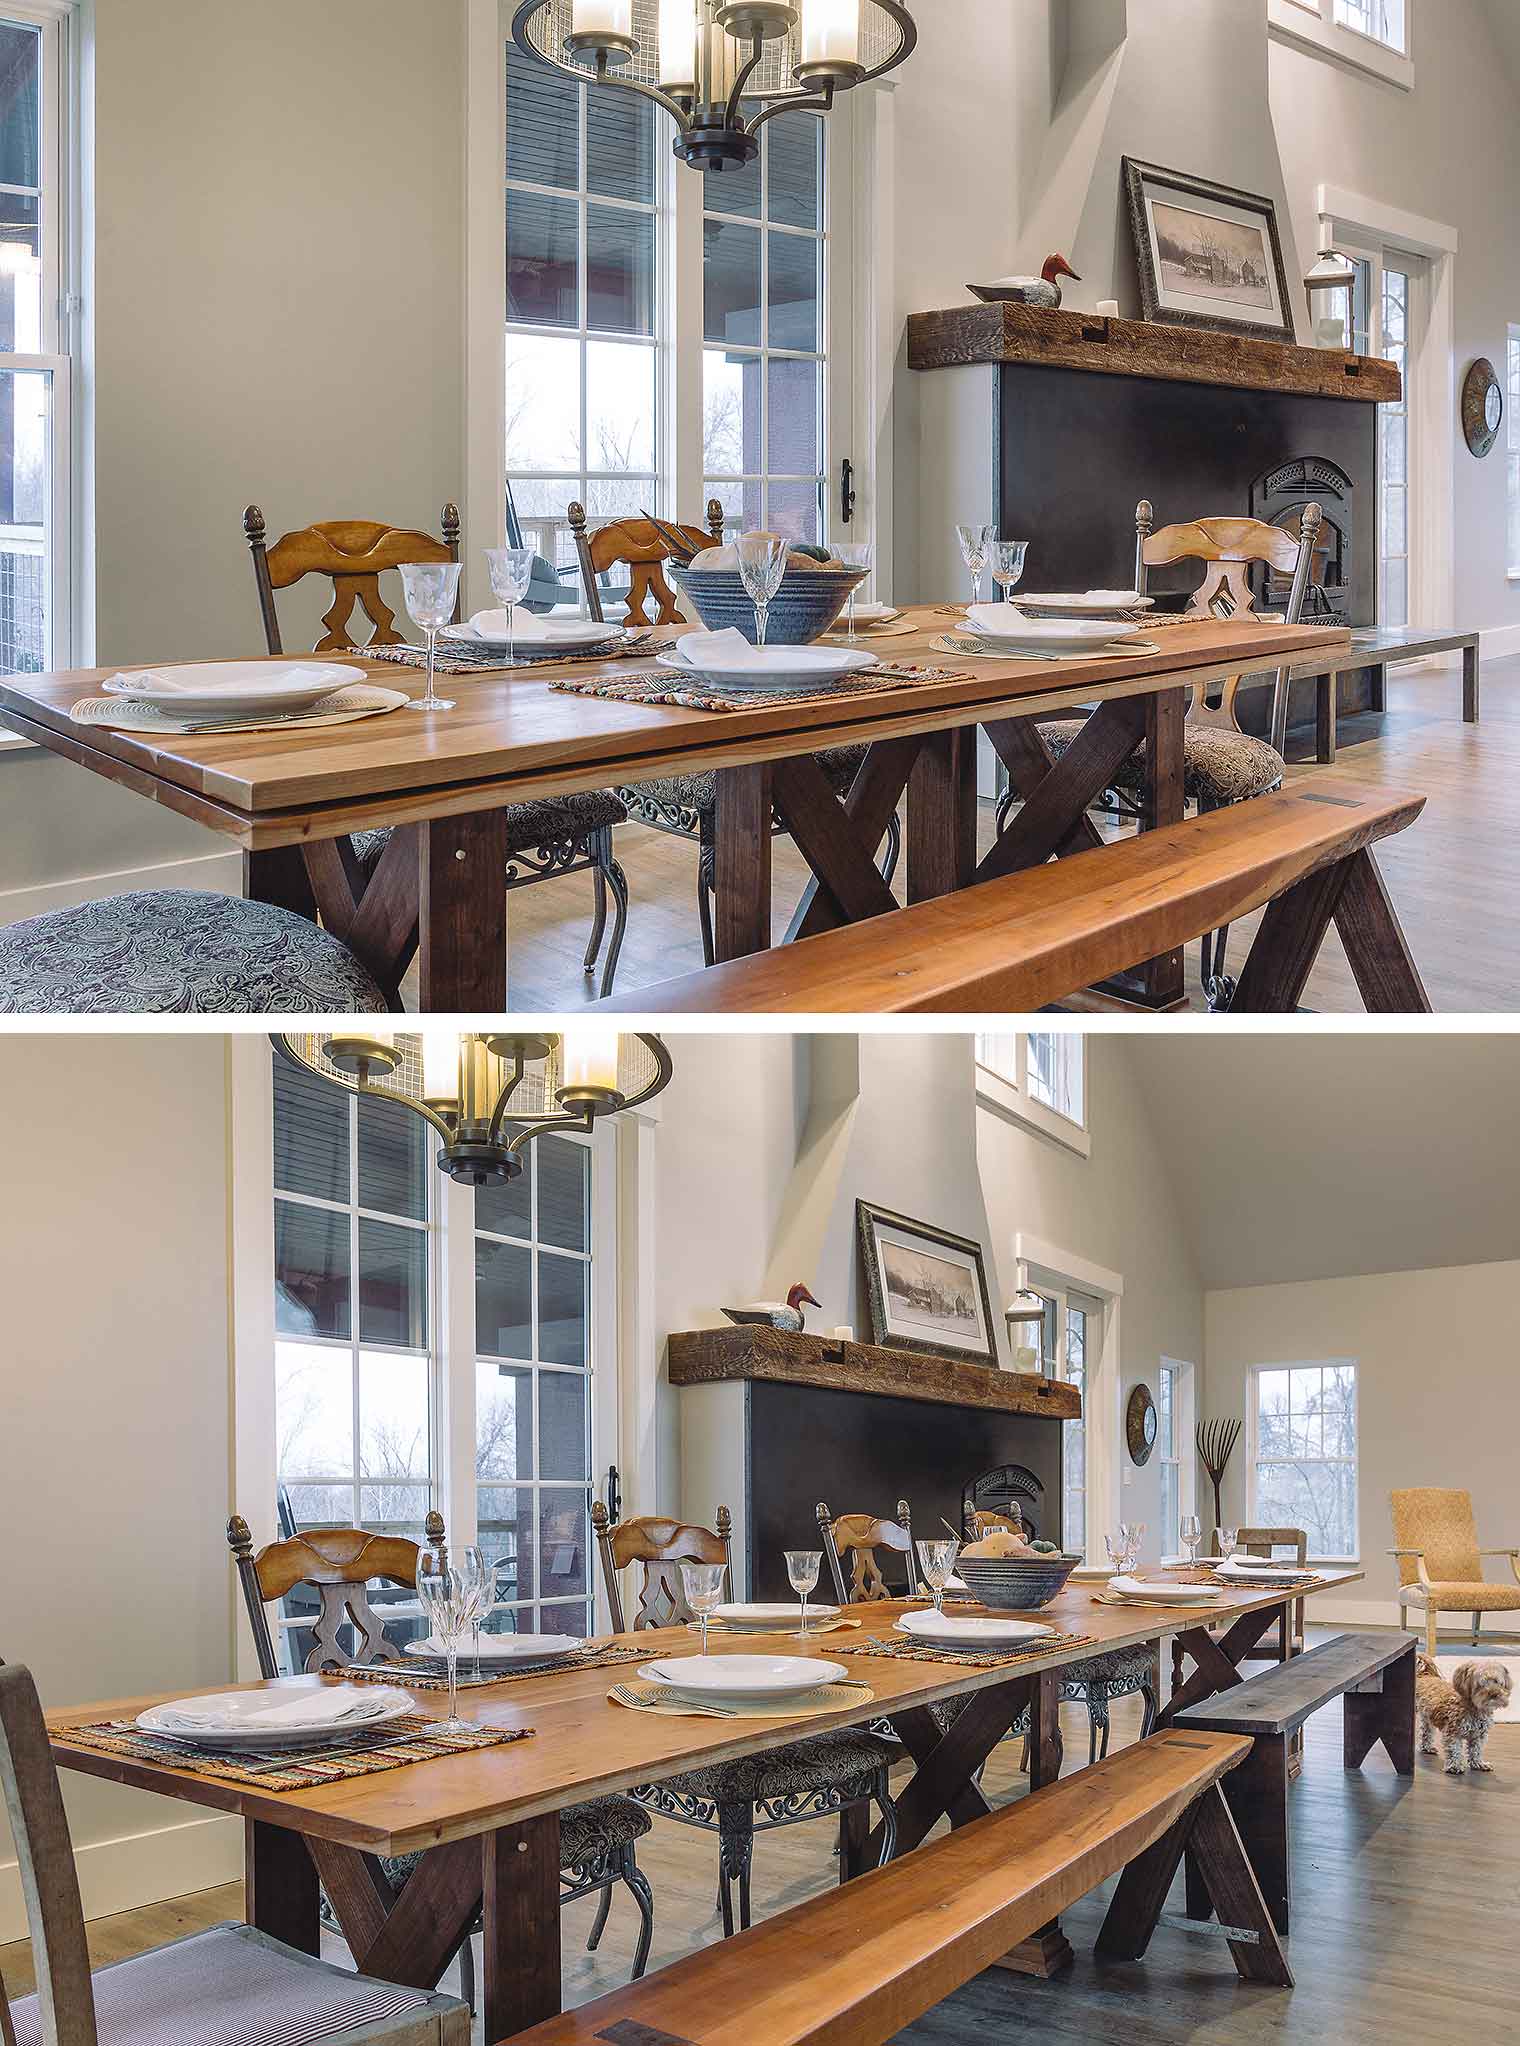 Custom dining table of salvaged wood opens to twice its width, designed and built by Silent Rivers of Des Moines for custom new home in St. Charles, Iowa